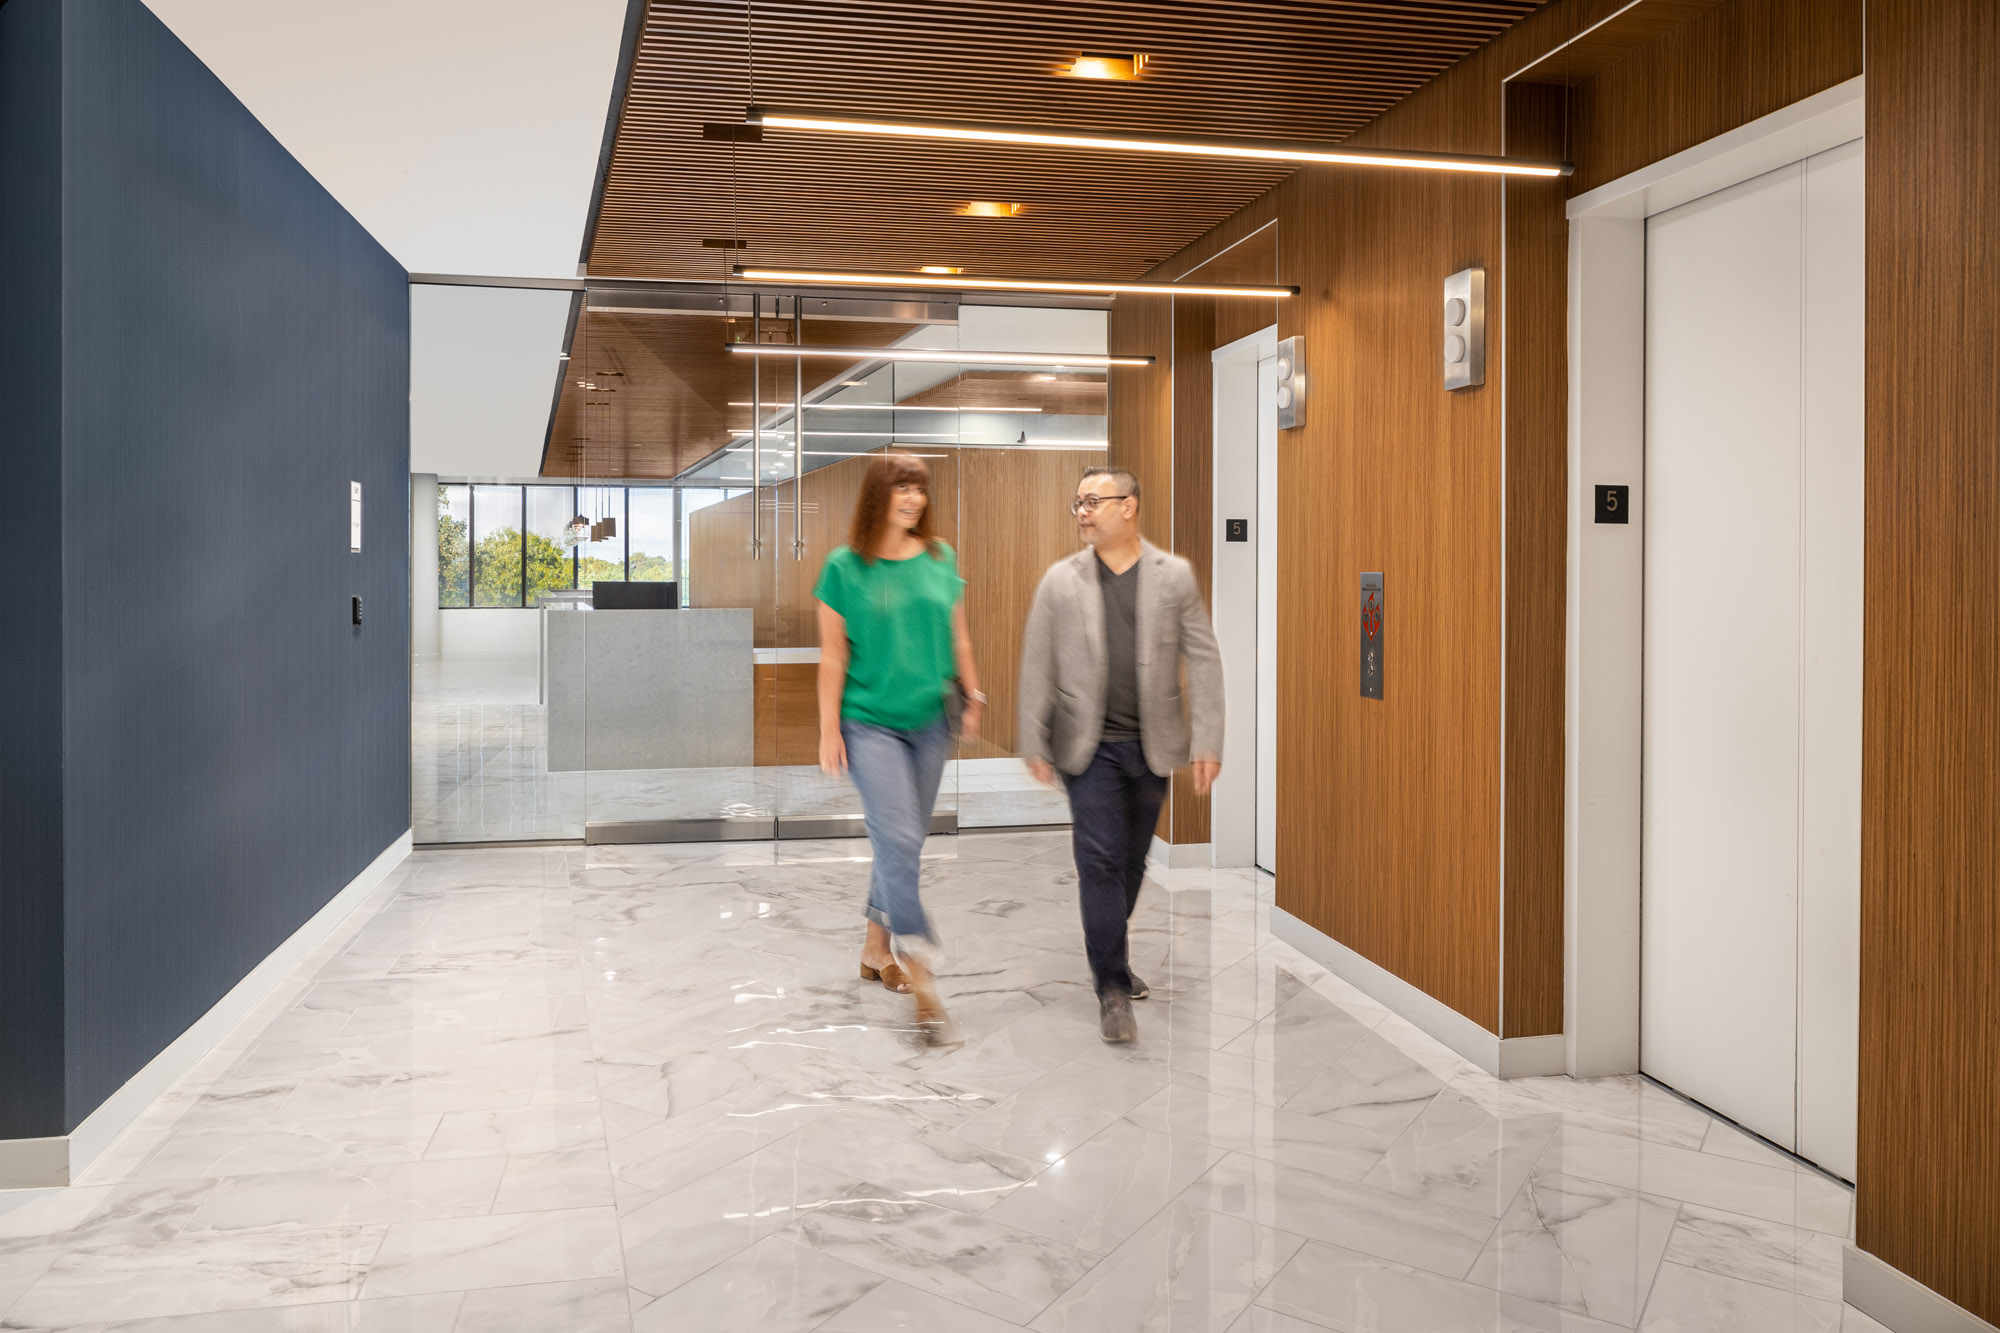 World Architecture News: NELSON Worldwide complete Soliant Health’s offices in Georgia USA